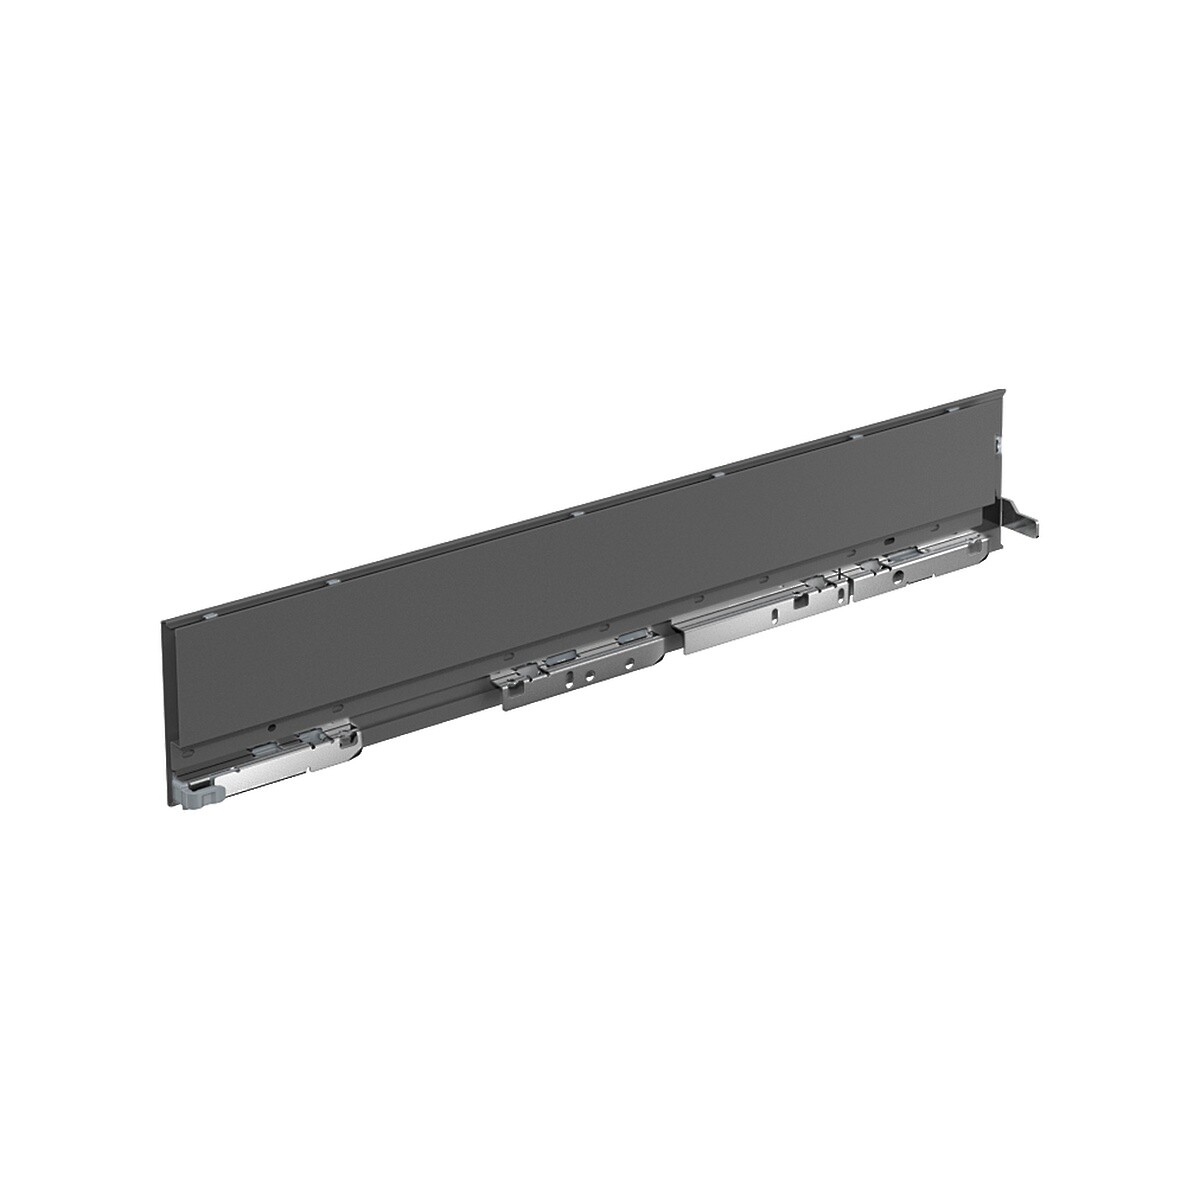 AvanTech YOU Drawer side profile, height 101 mm x NL 400 mm, Anthracite, Right